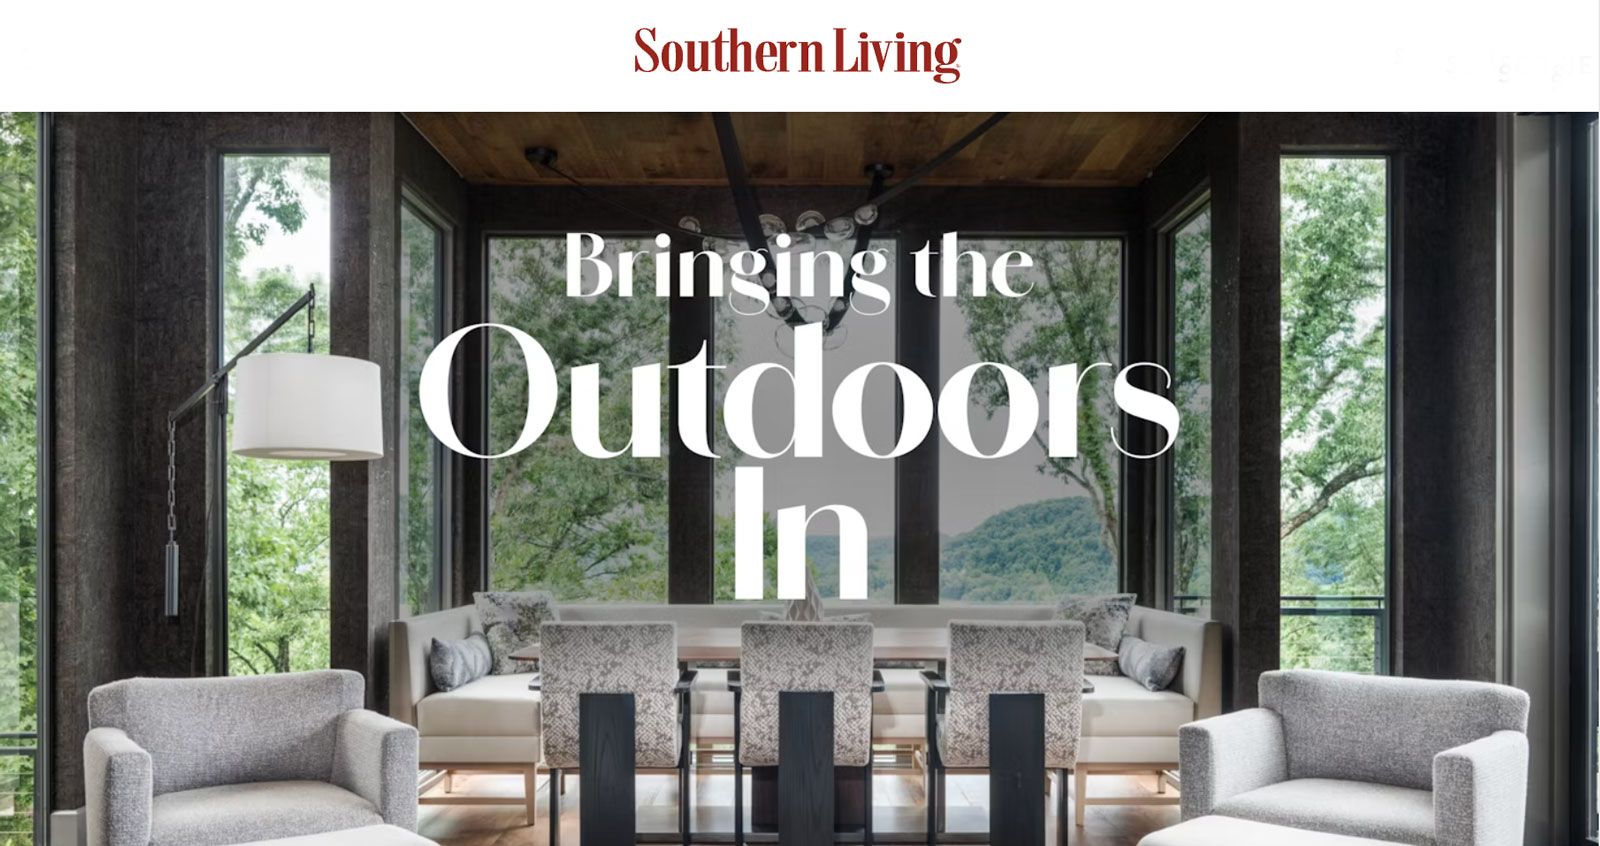 Southern Living features Castle Homes: Bringing the Outdoors In